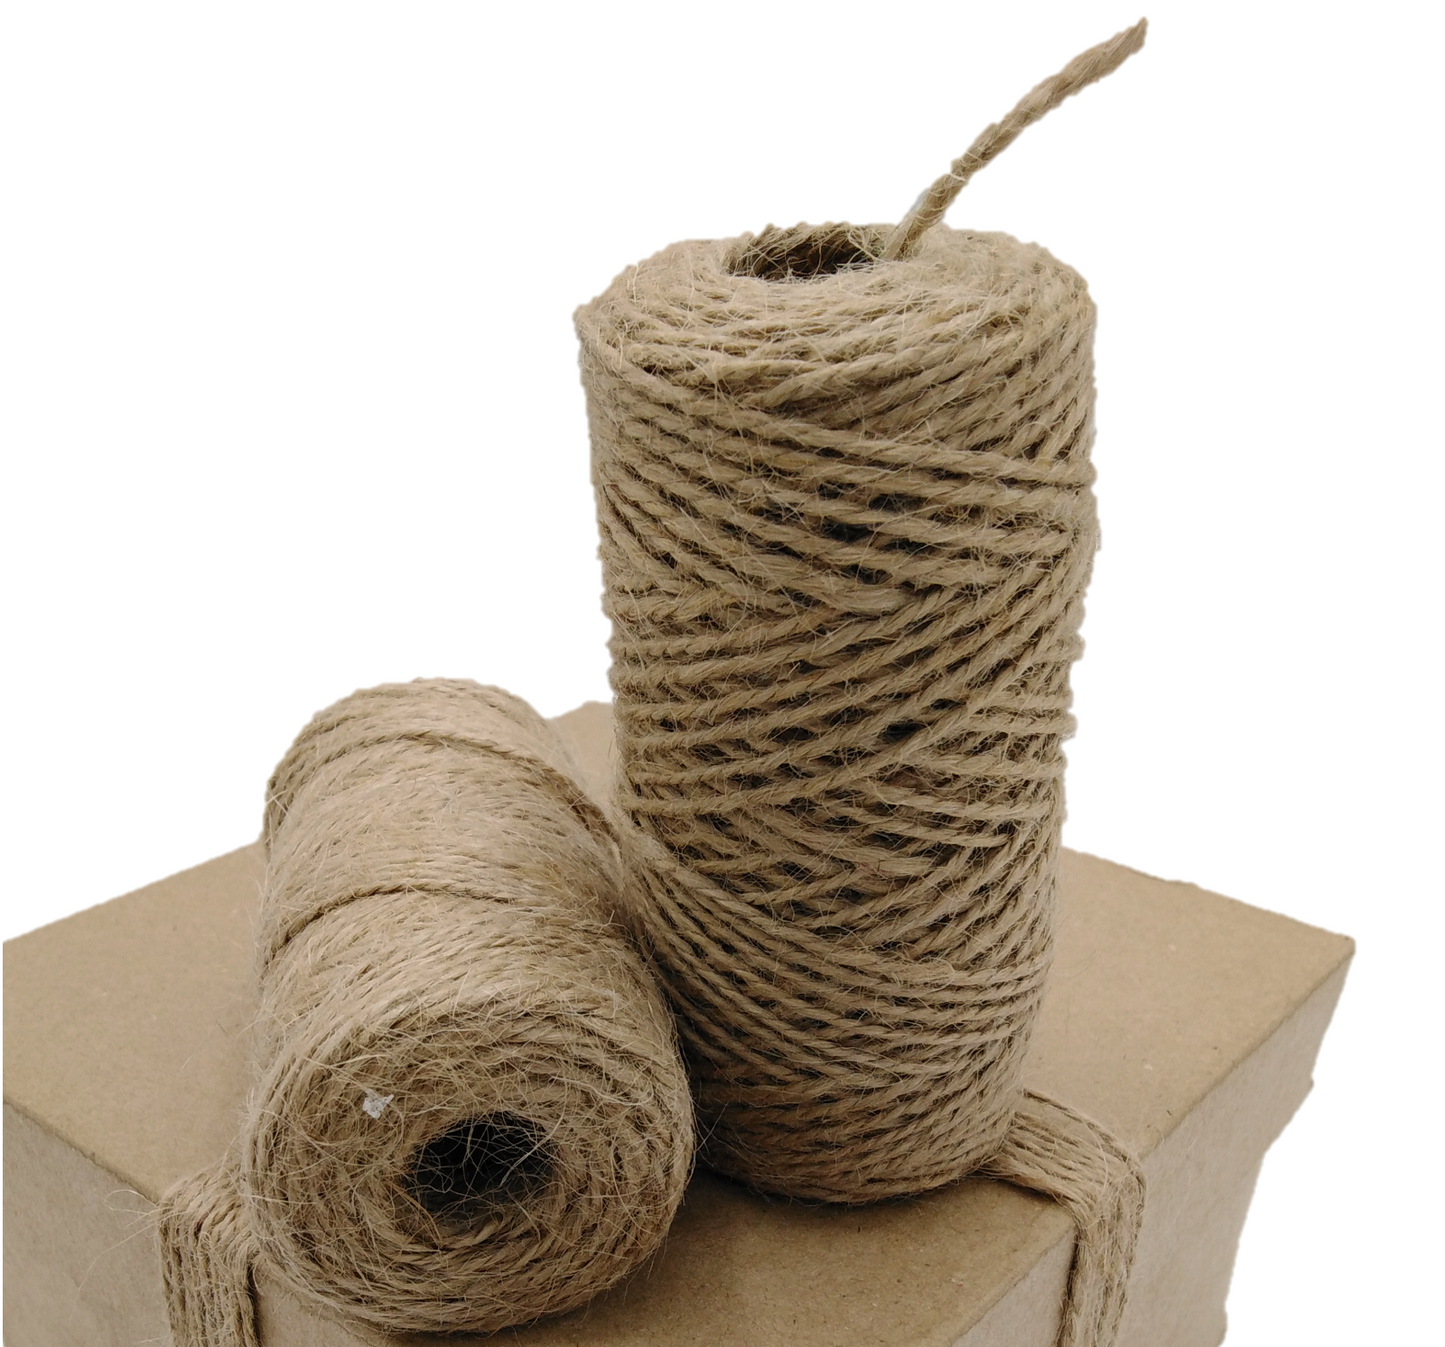 Creavvee® Natural Garden Green/Brown Jute Twine String Biodegradable 2 Ply Hessian, Rustic Cord Rope - 3 Lenghts (20,60,120 cm)